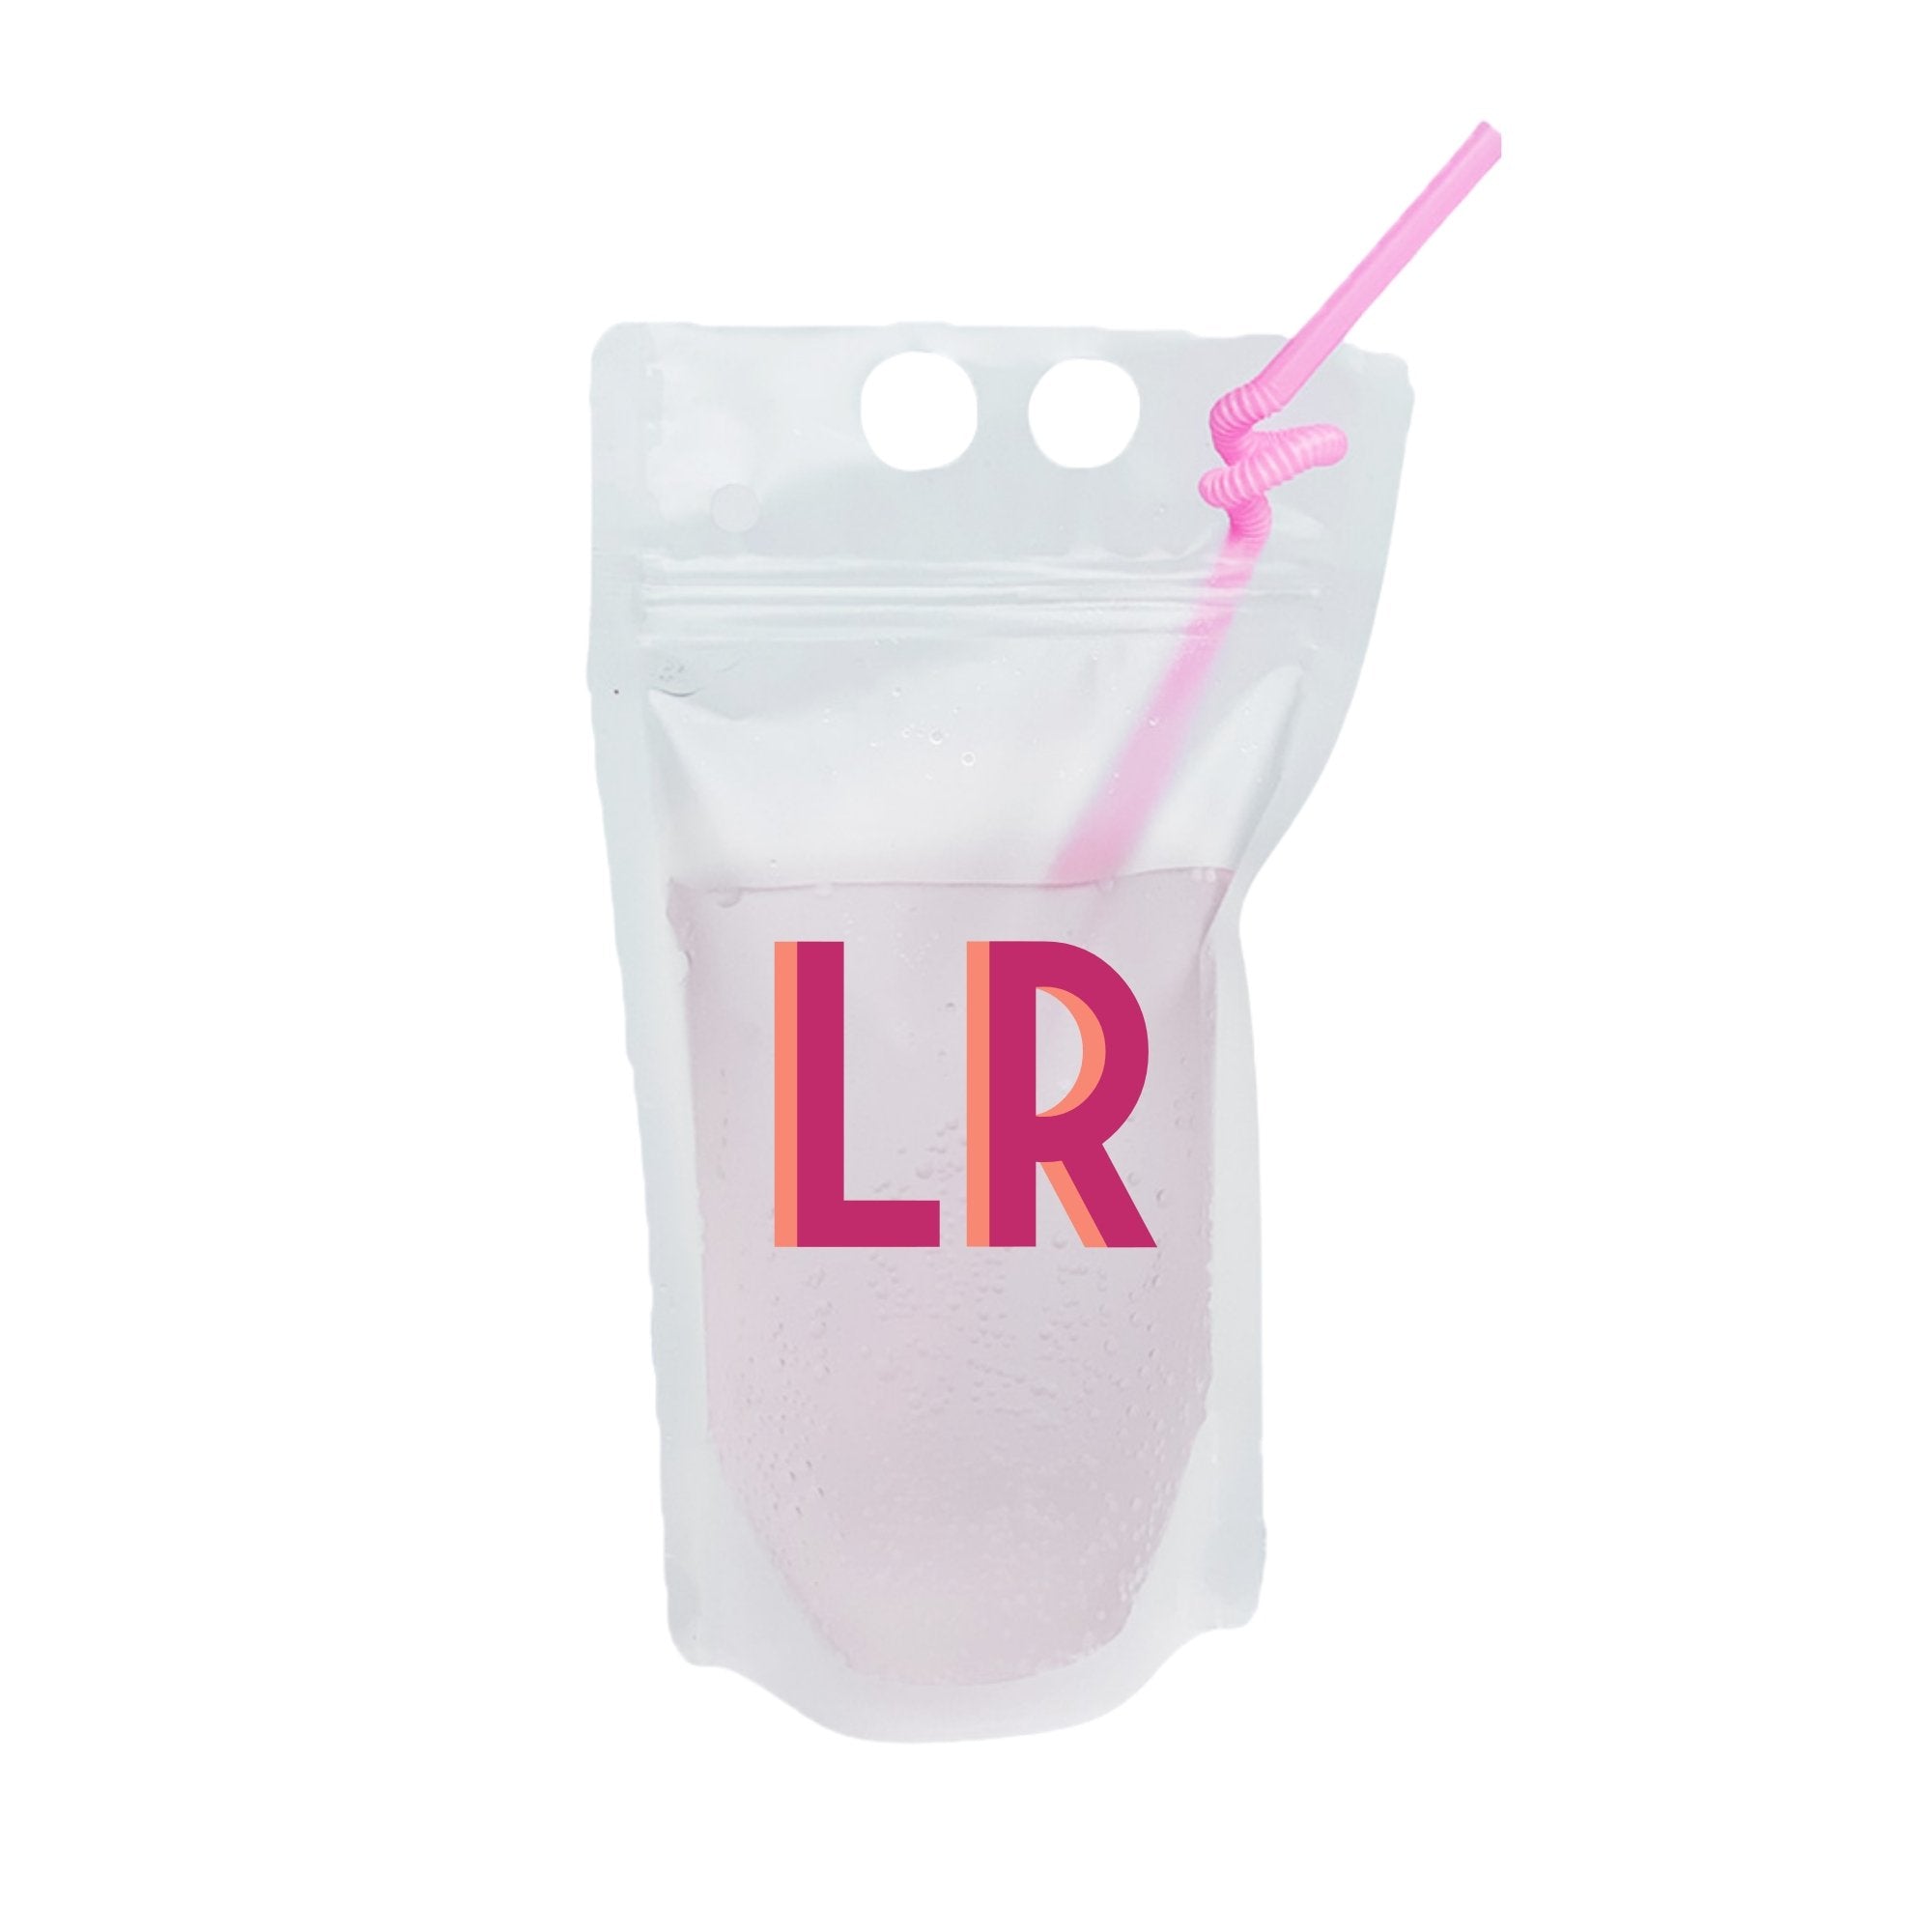 A party pouch with an "LR" monogrammed in pink